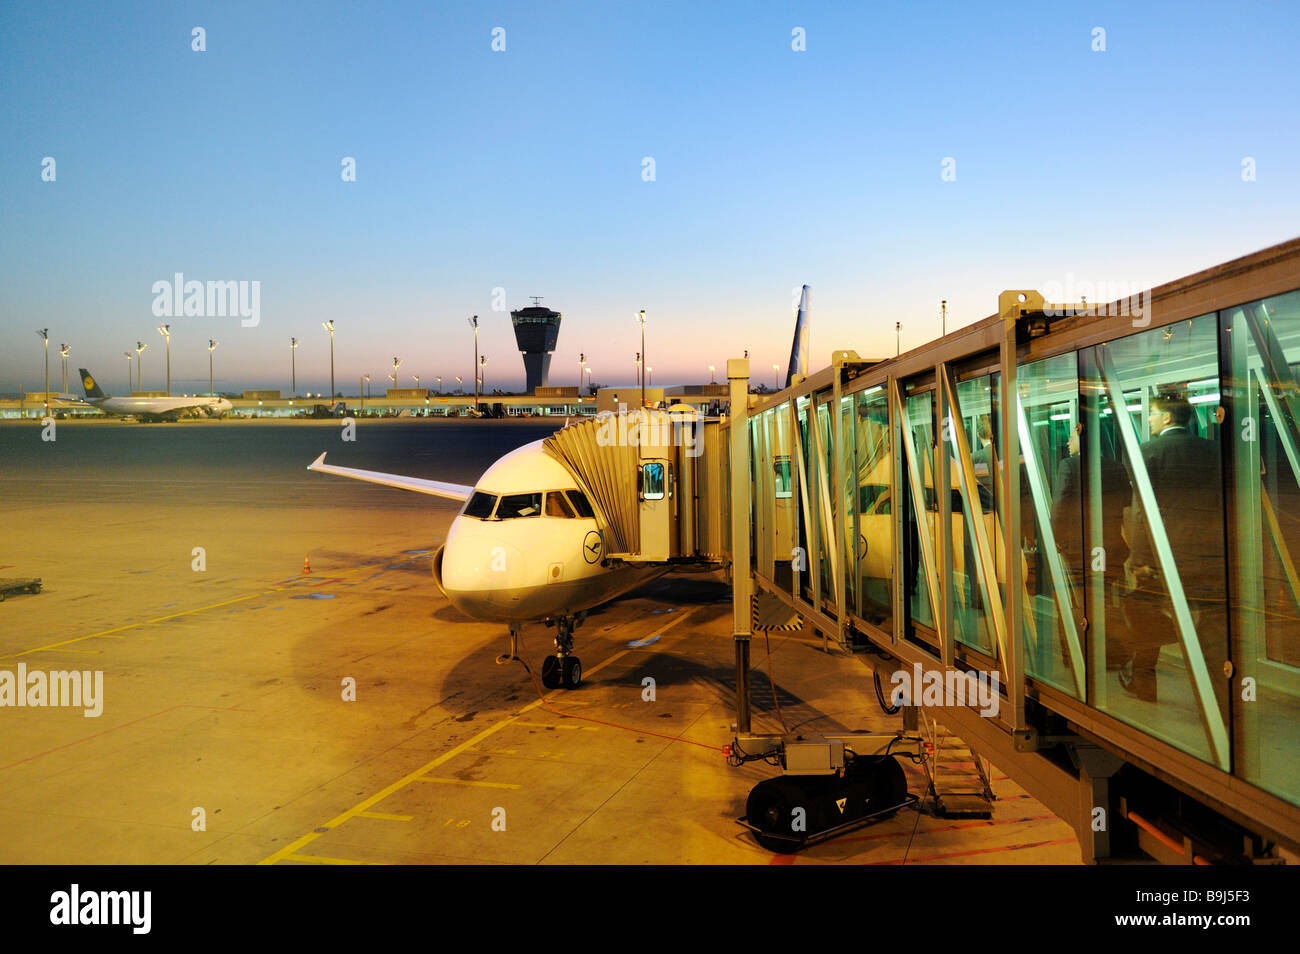 Boarding the plane in the early morning at sunrise, passengers getting on a plane, Munich Airport, Bavaria, Germany Stock Photo